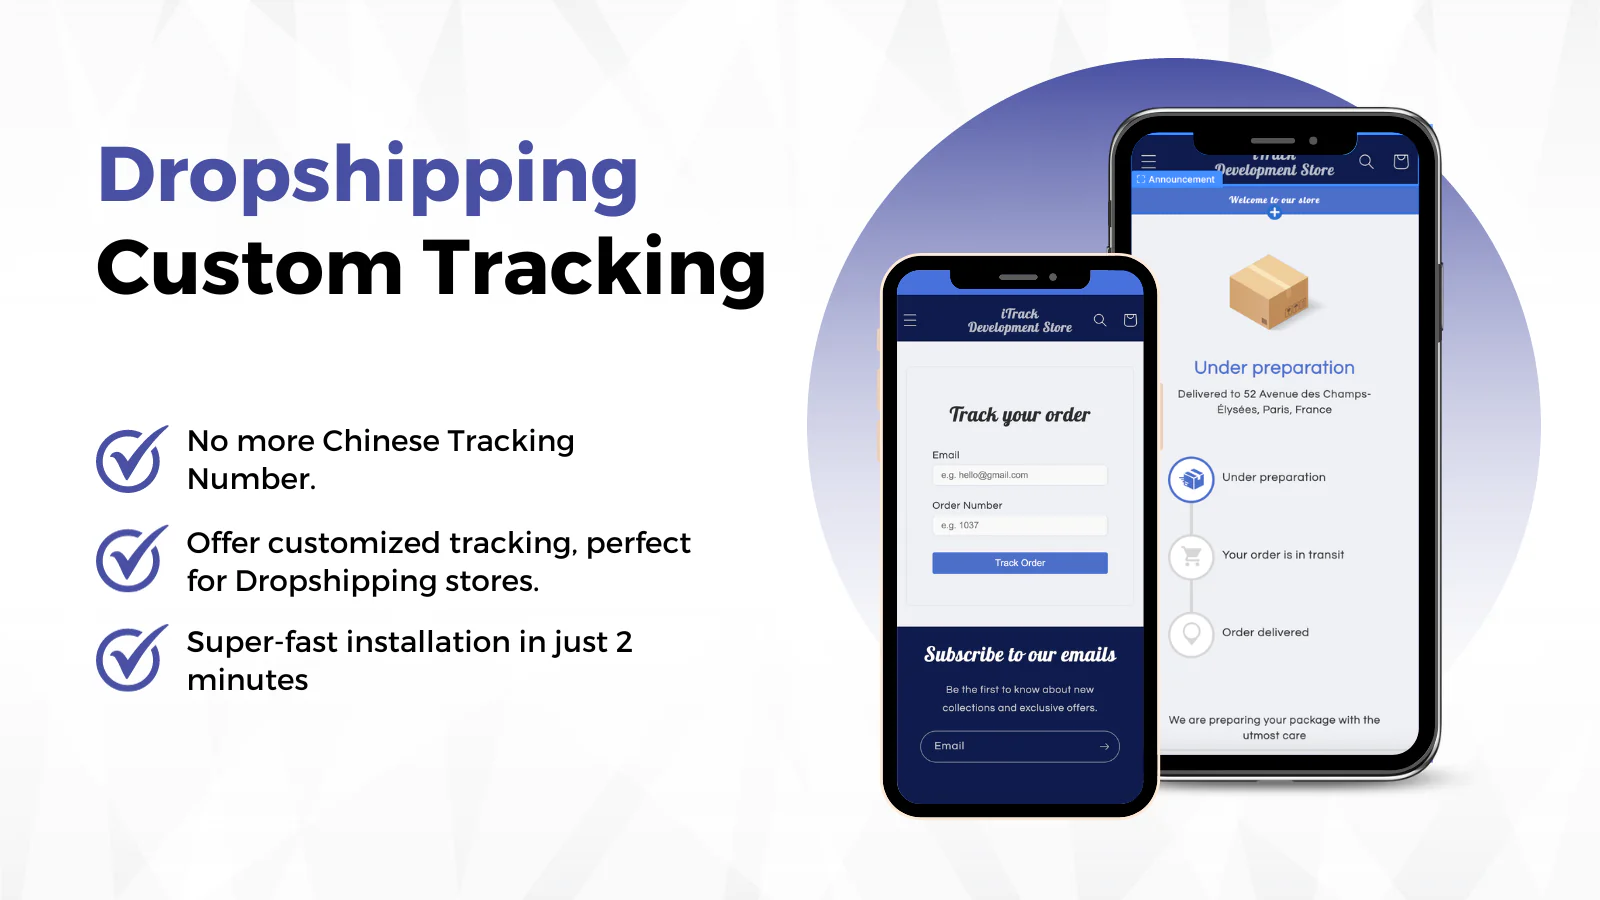 itrack-order-tracking-app-dropshipping